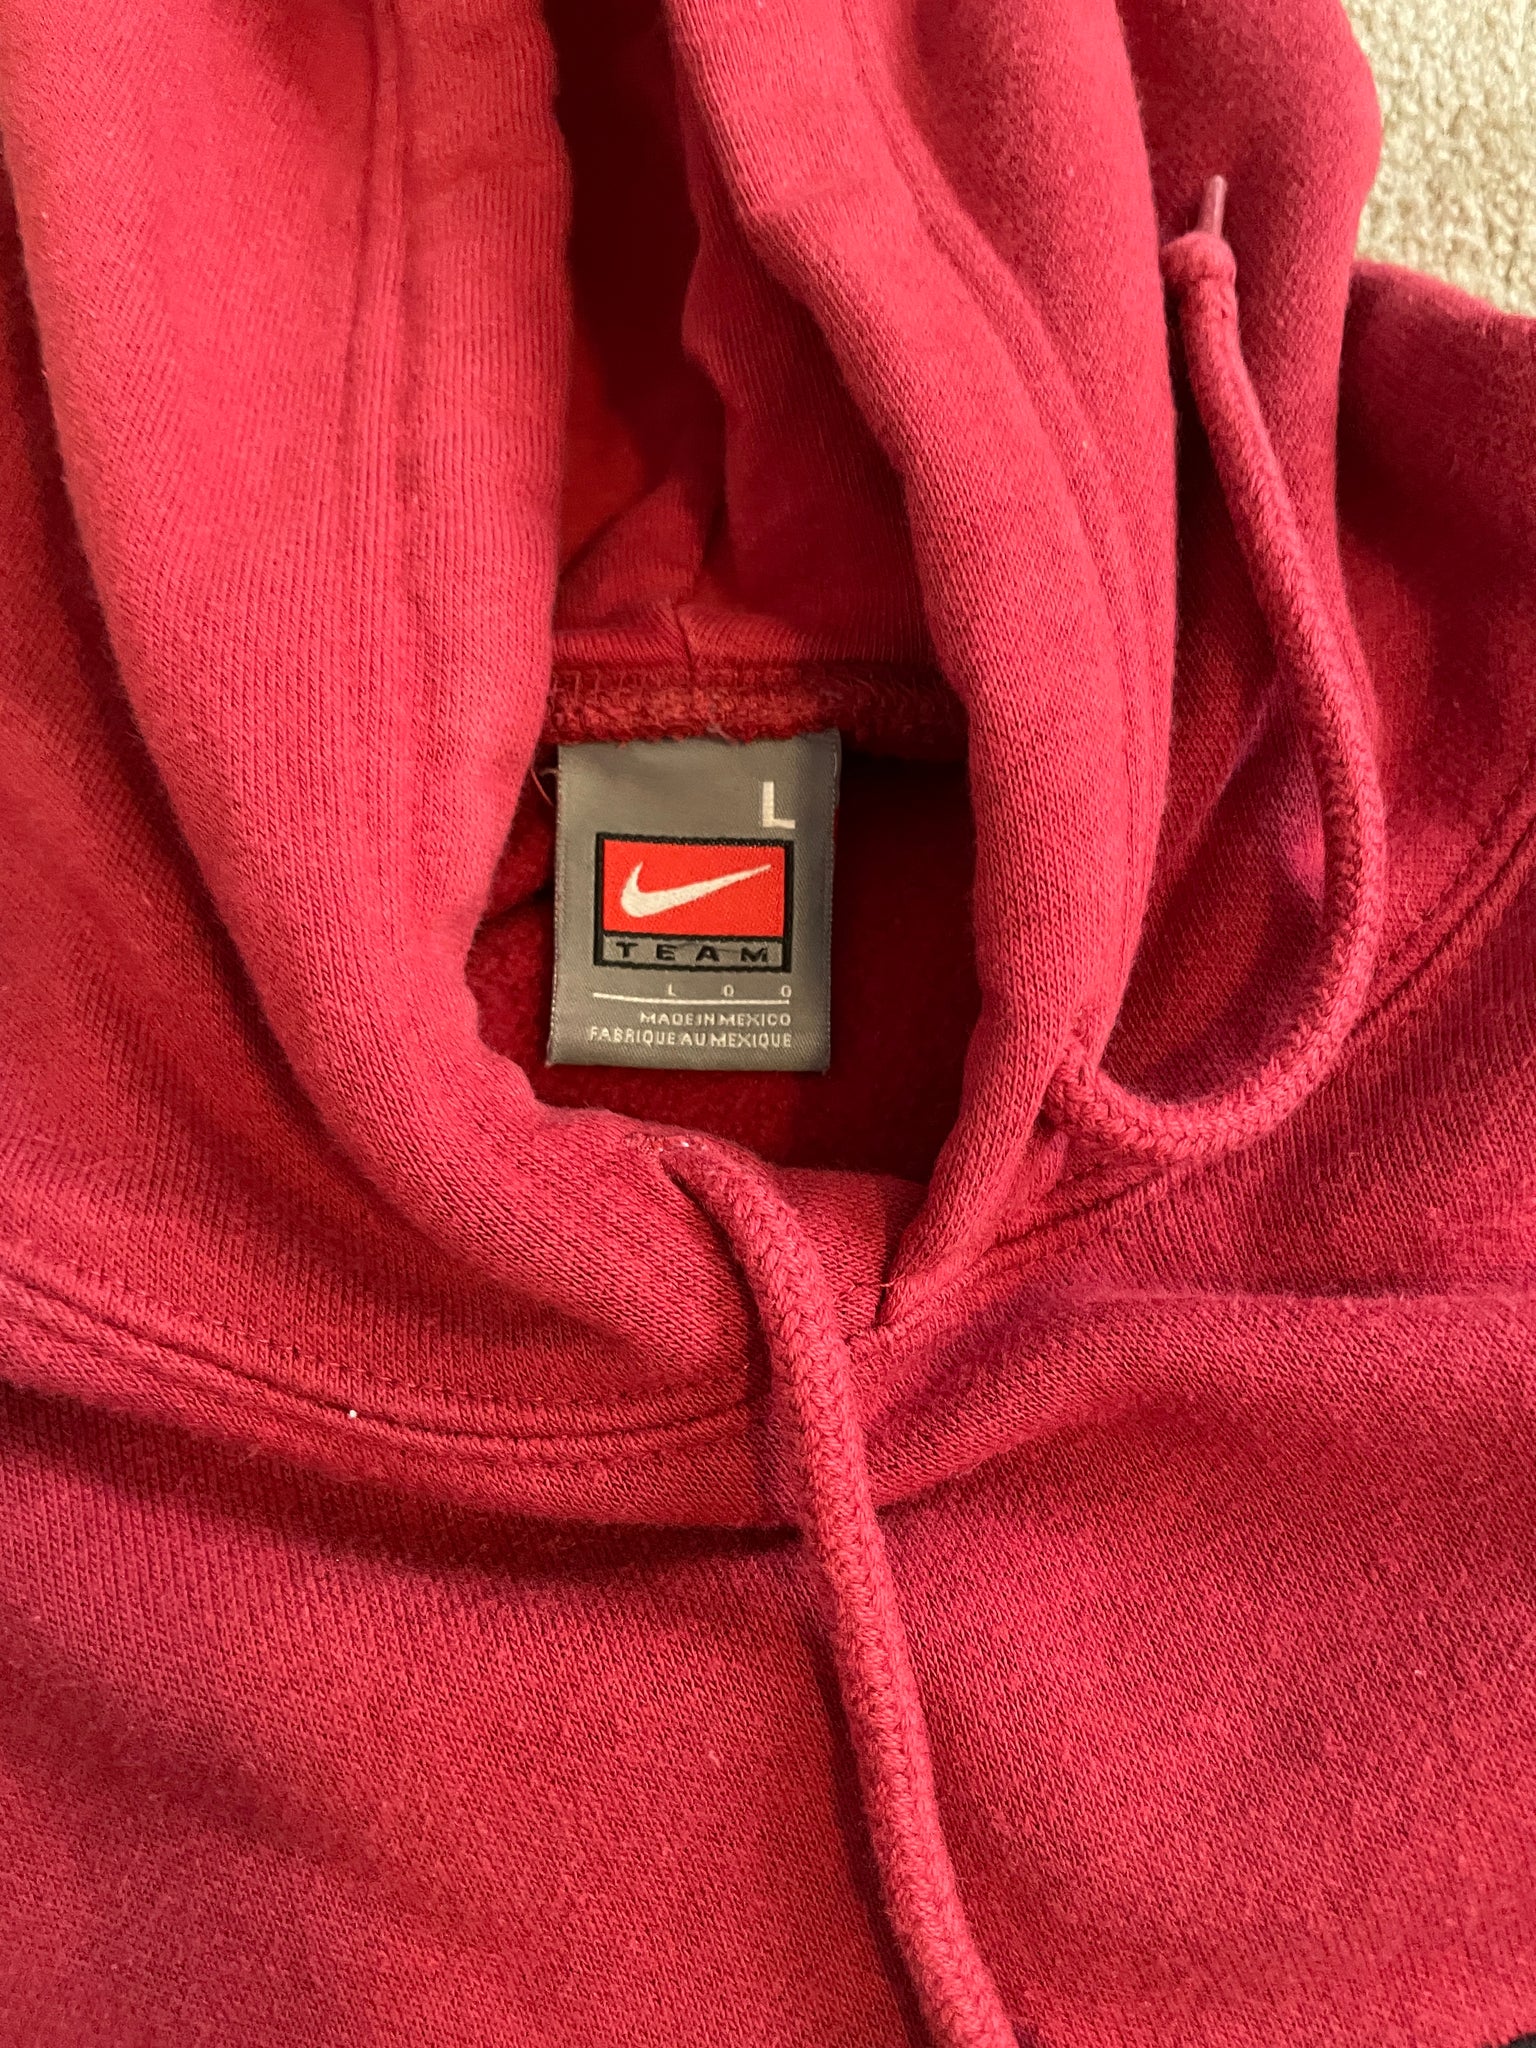 L) Stanford Nike Hoodie – Happyy.thrifts